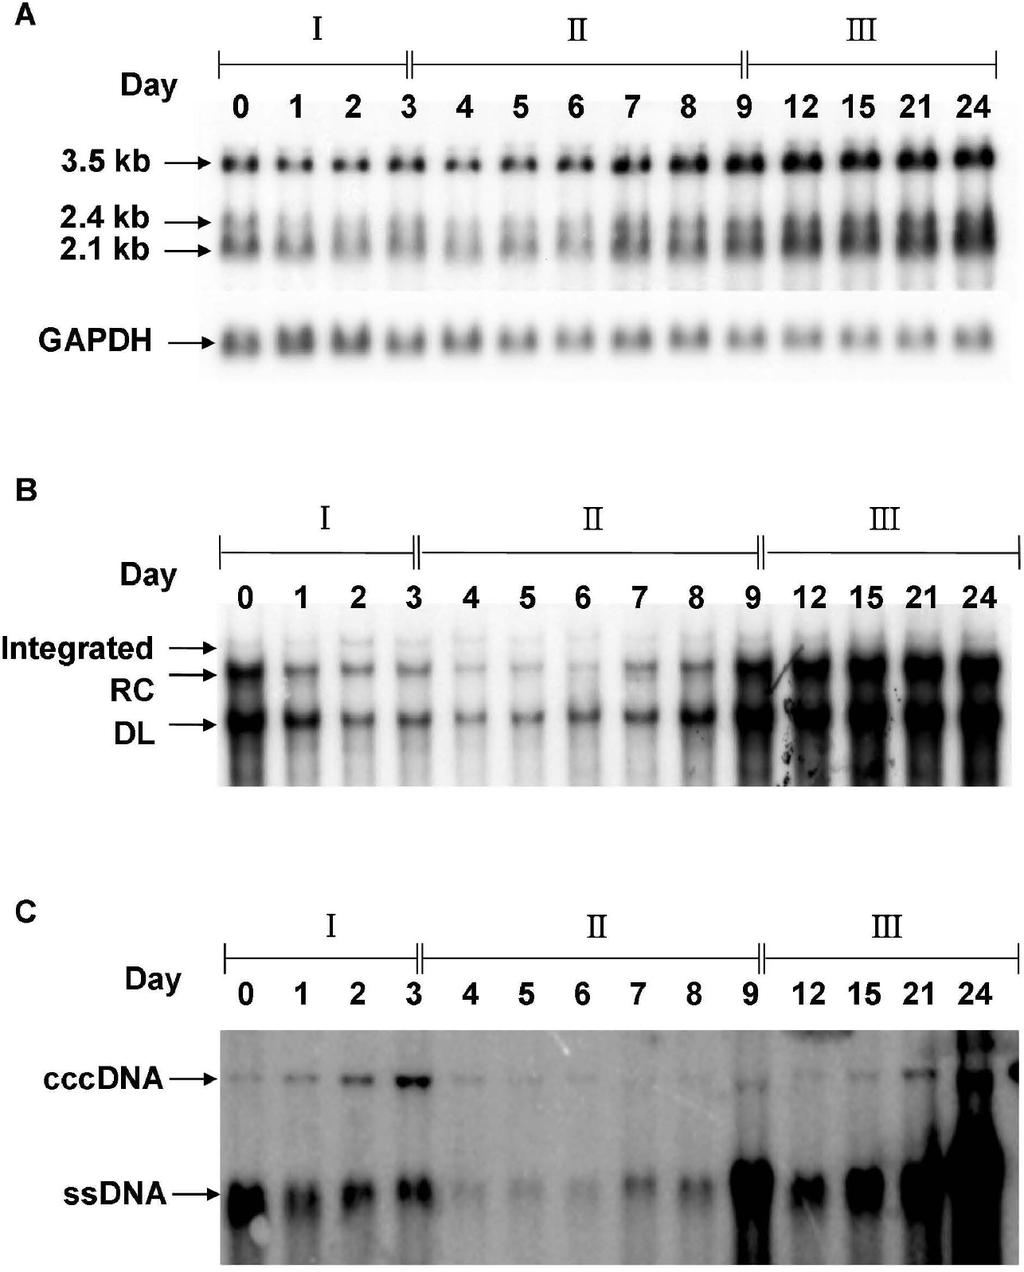 Page 7 of 16 Figure 2 The dynamic changes of HBV transcripts, intracellular viral DNA and cccdna expression profiles in different cell growth phases. 1.3ES2 cells (2.